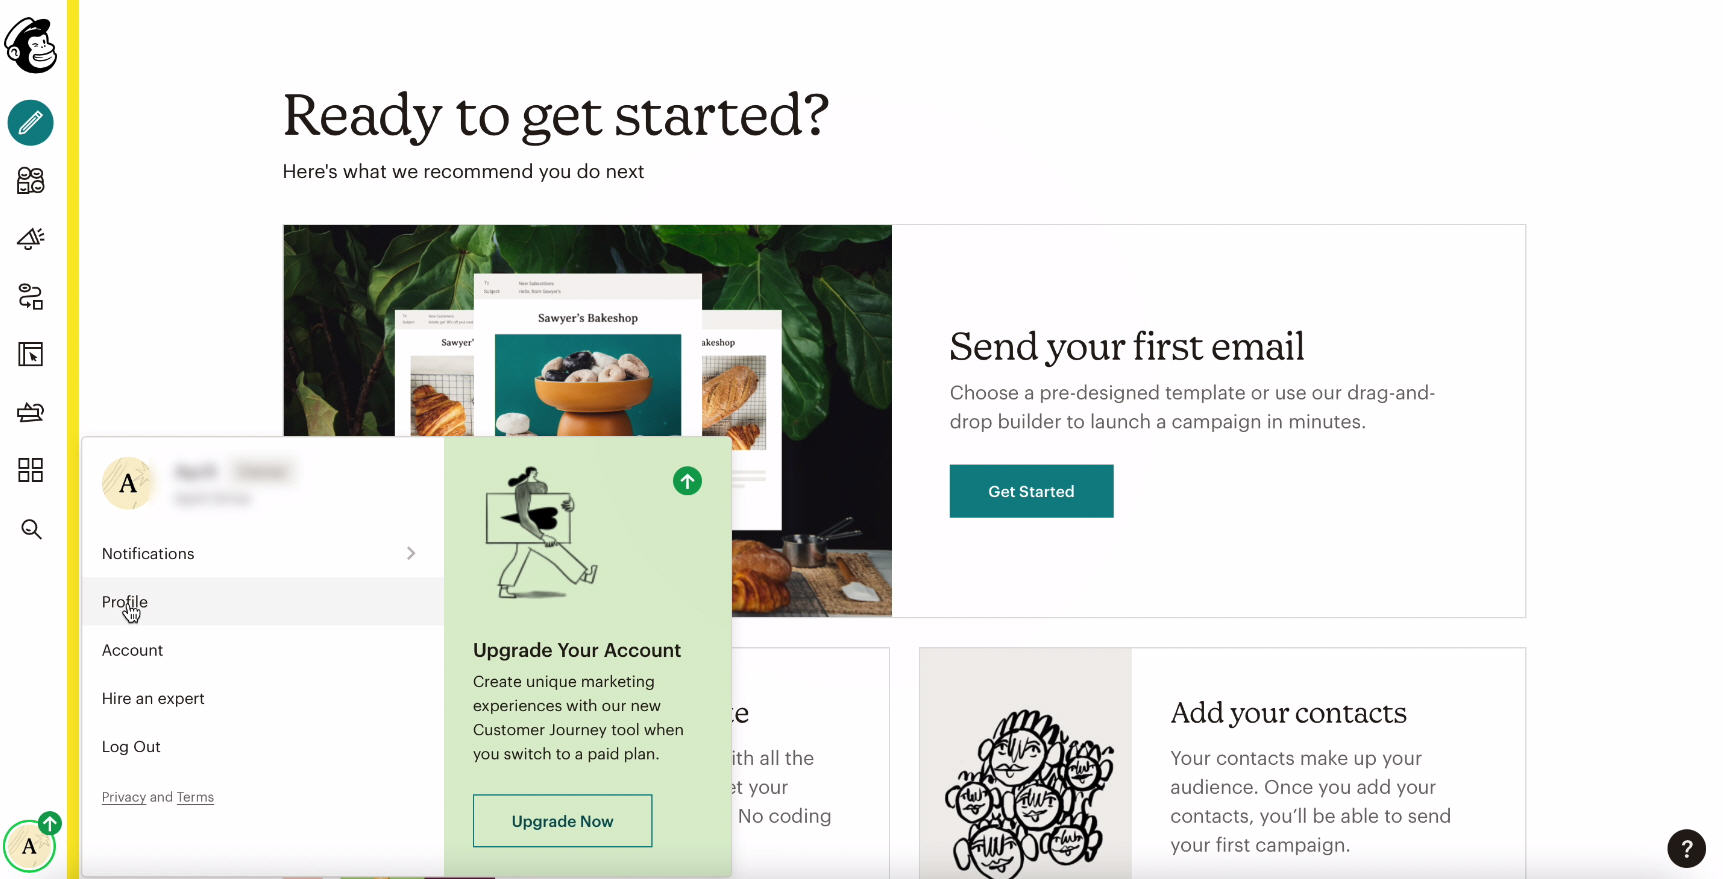 MailChimp and Facebook integration | Go to Profile